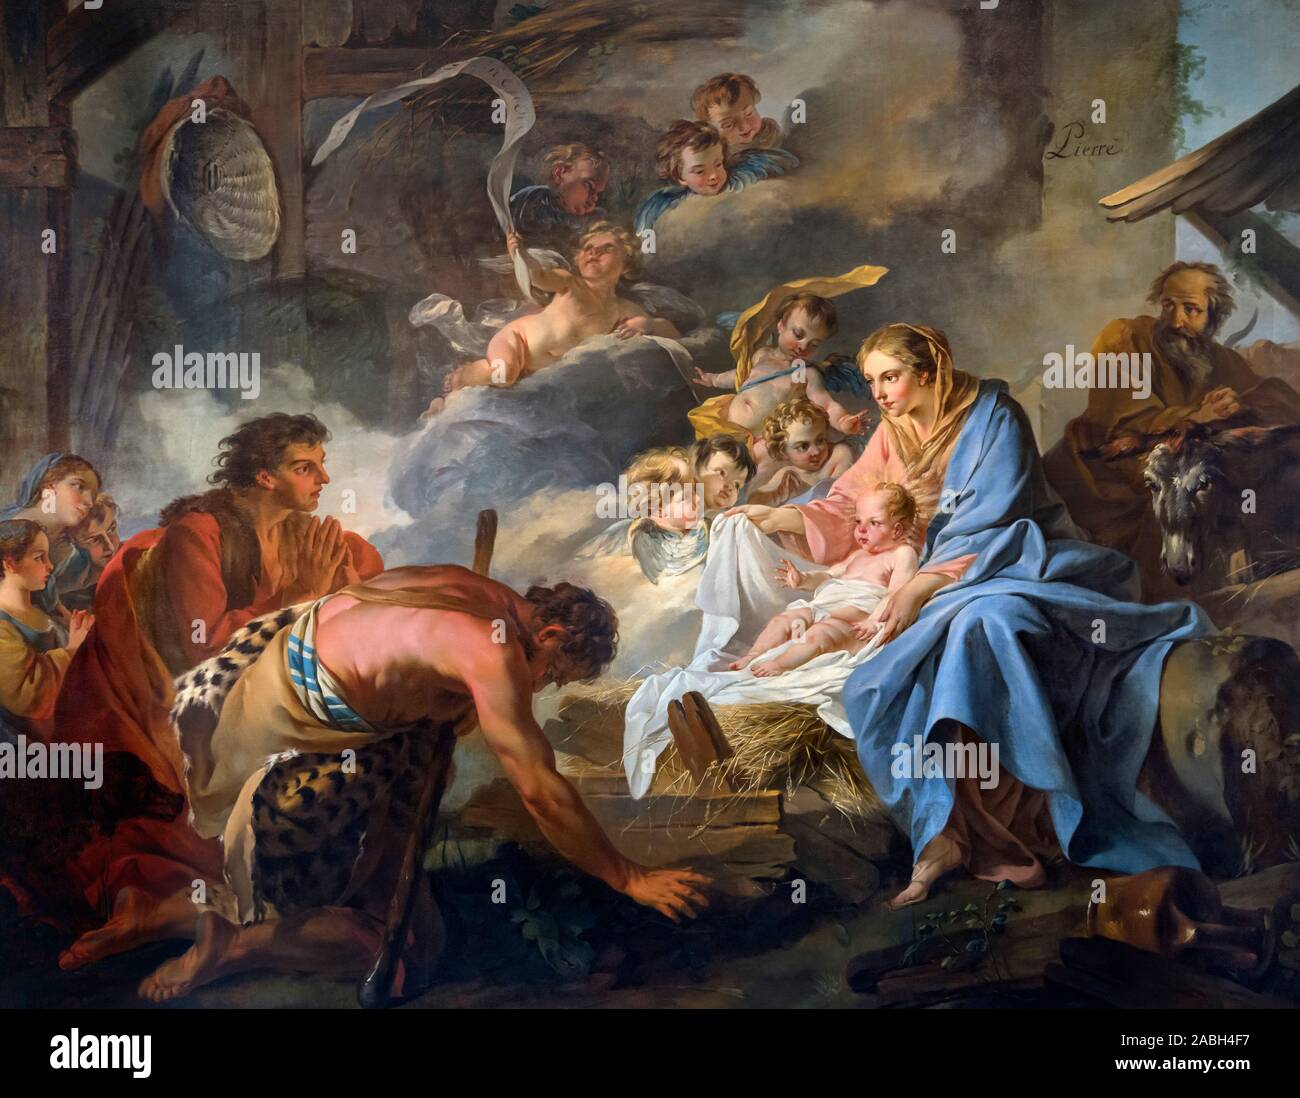 The Adoration of the Shepherds by Jean-Baptiste Marie Pierre (1714-1789), oil on canvas, 1745. Nativity scene. Stock Photo